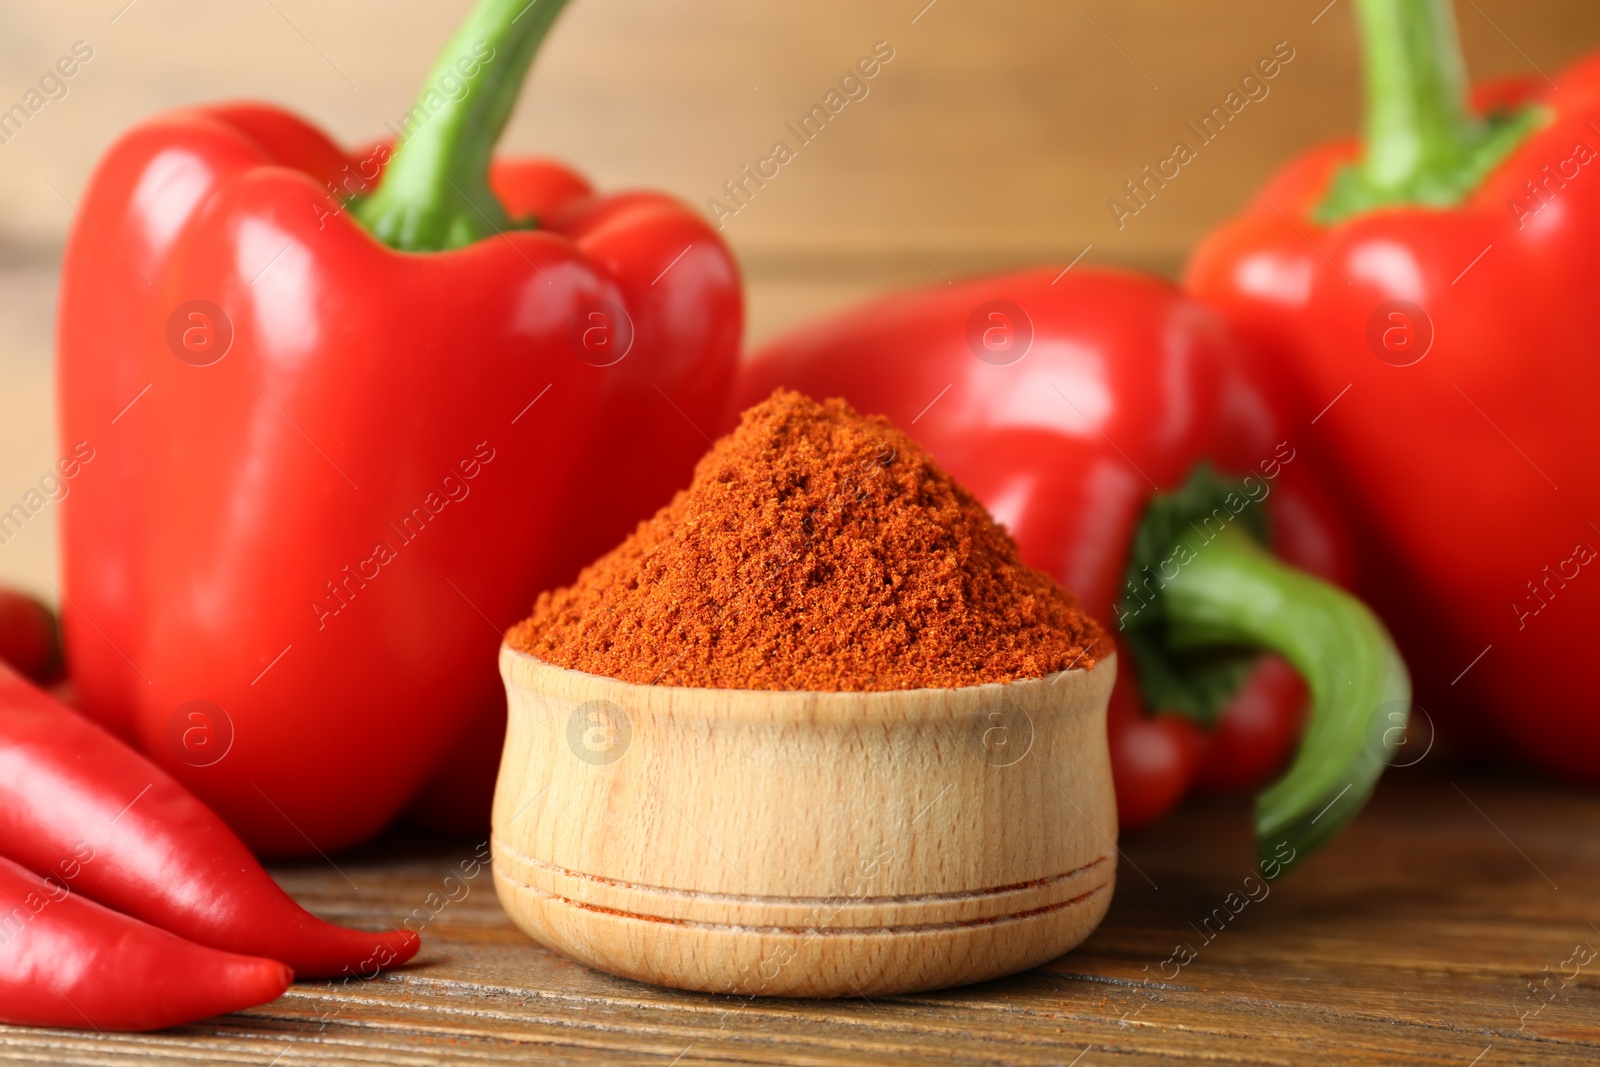 Photo of Paprika powder and fresh chili peppers on wooden table, closeup